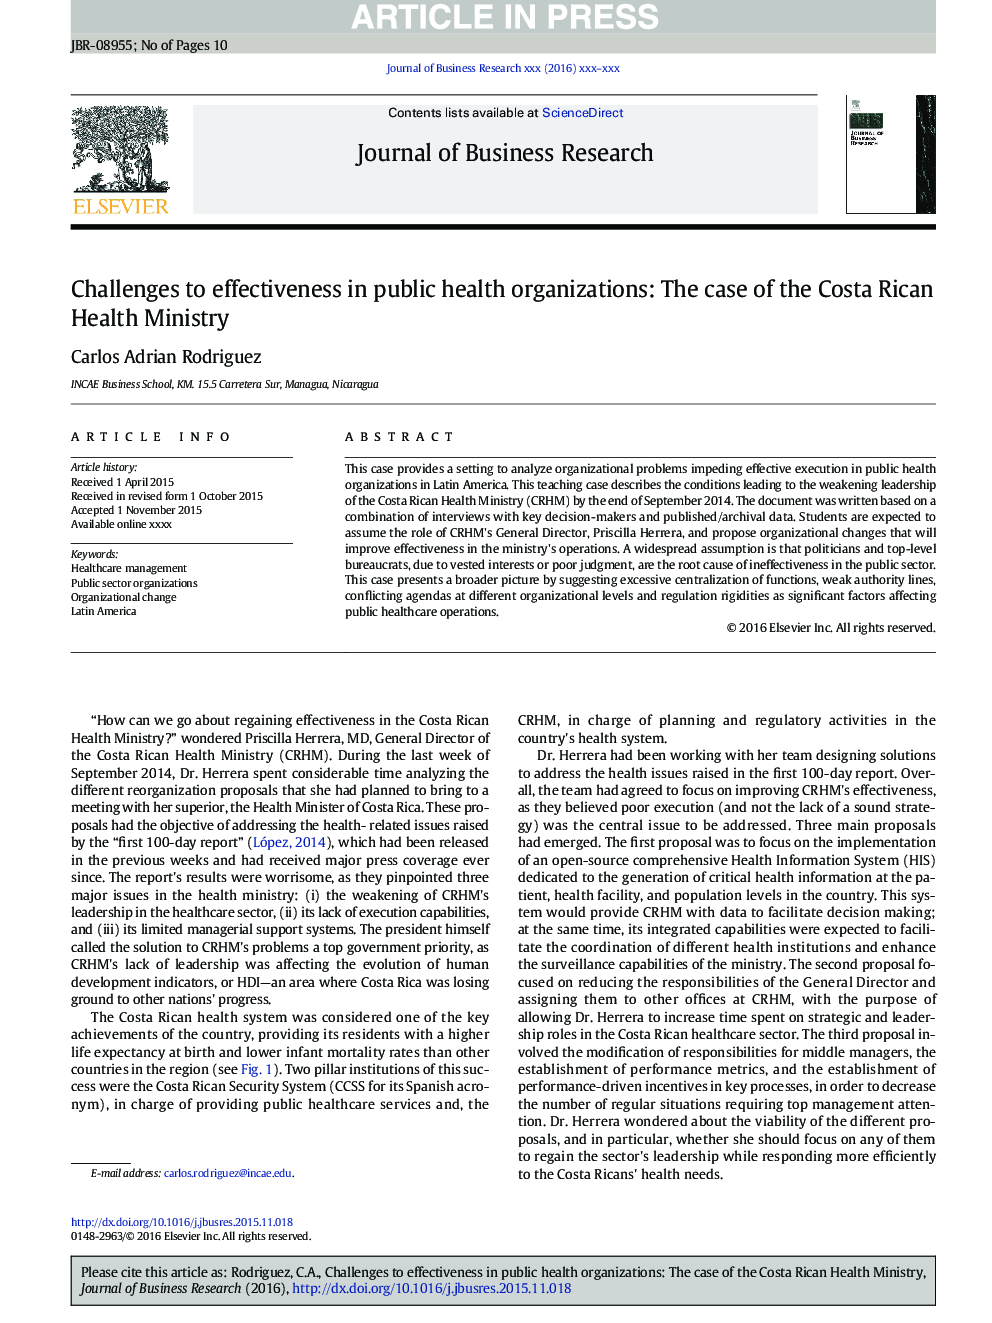 Challenges to effectiveness in public health organizations: The case of the Costa Rican Health Ministry